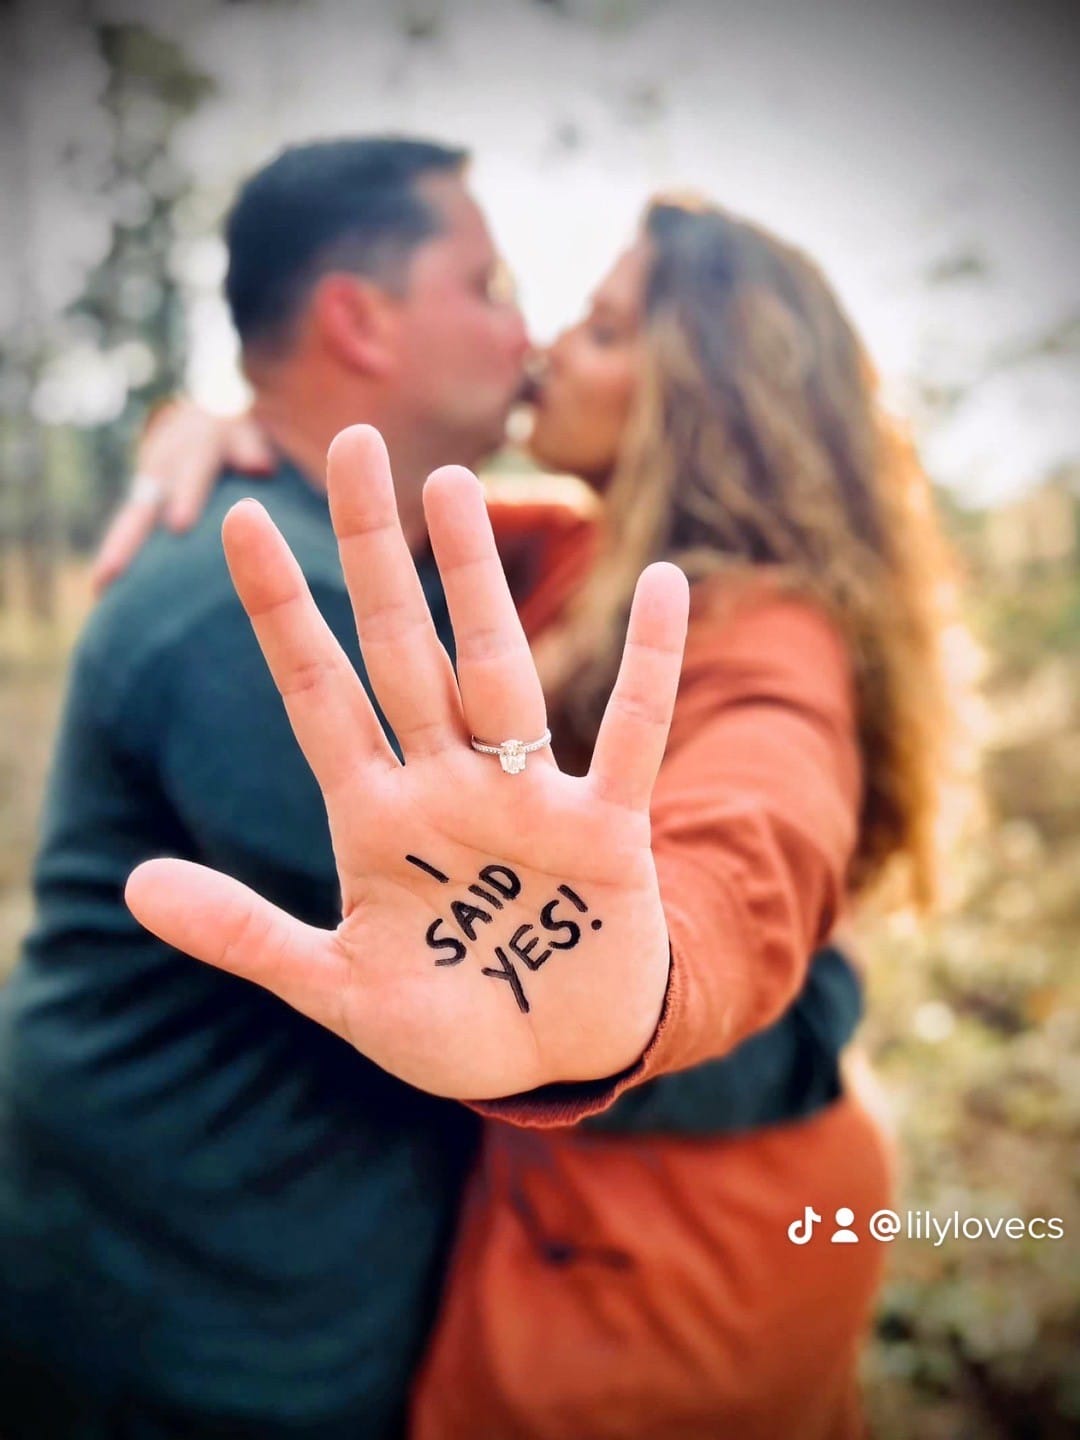 man and woman kiss in picture while woman holds hand towards the camera with "i said yes" written on the palm of her hand